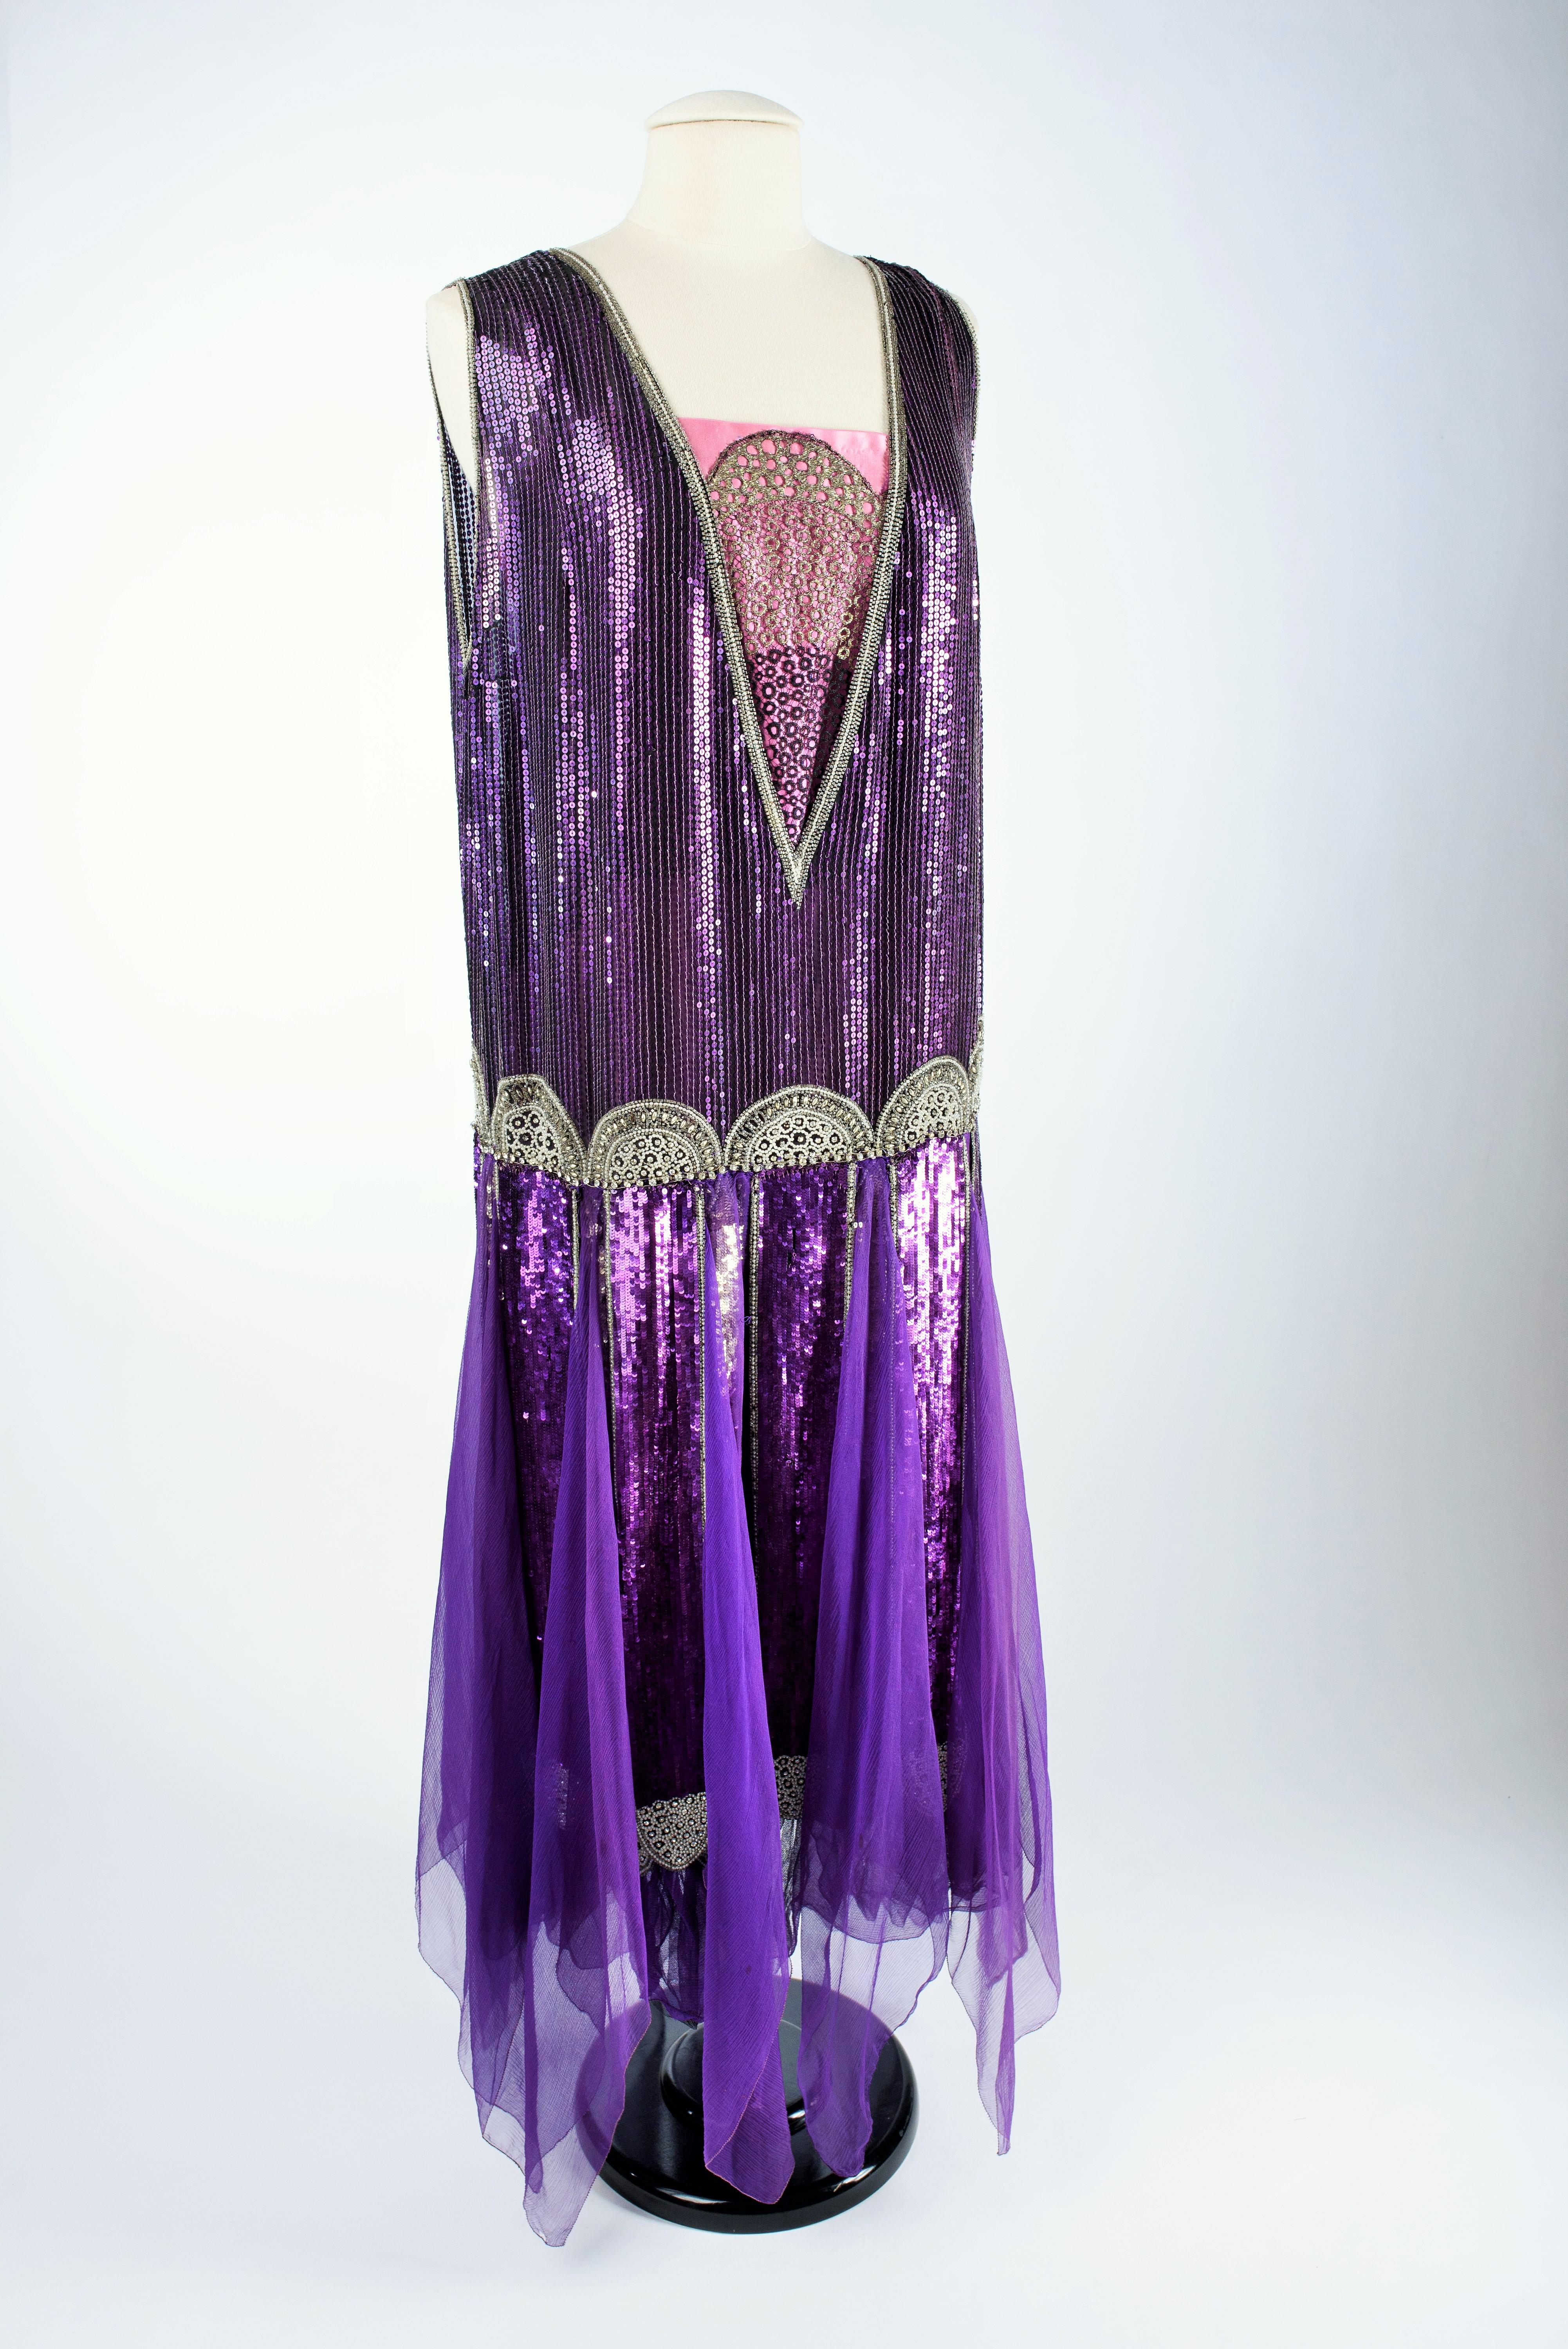 A Paul Poiret Ball Gown in Sequined Silk Crepe and Satin - France Circa 1925 For Sale 8